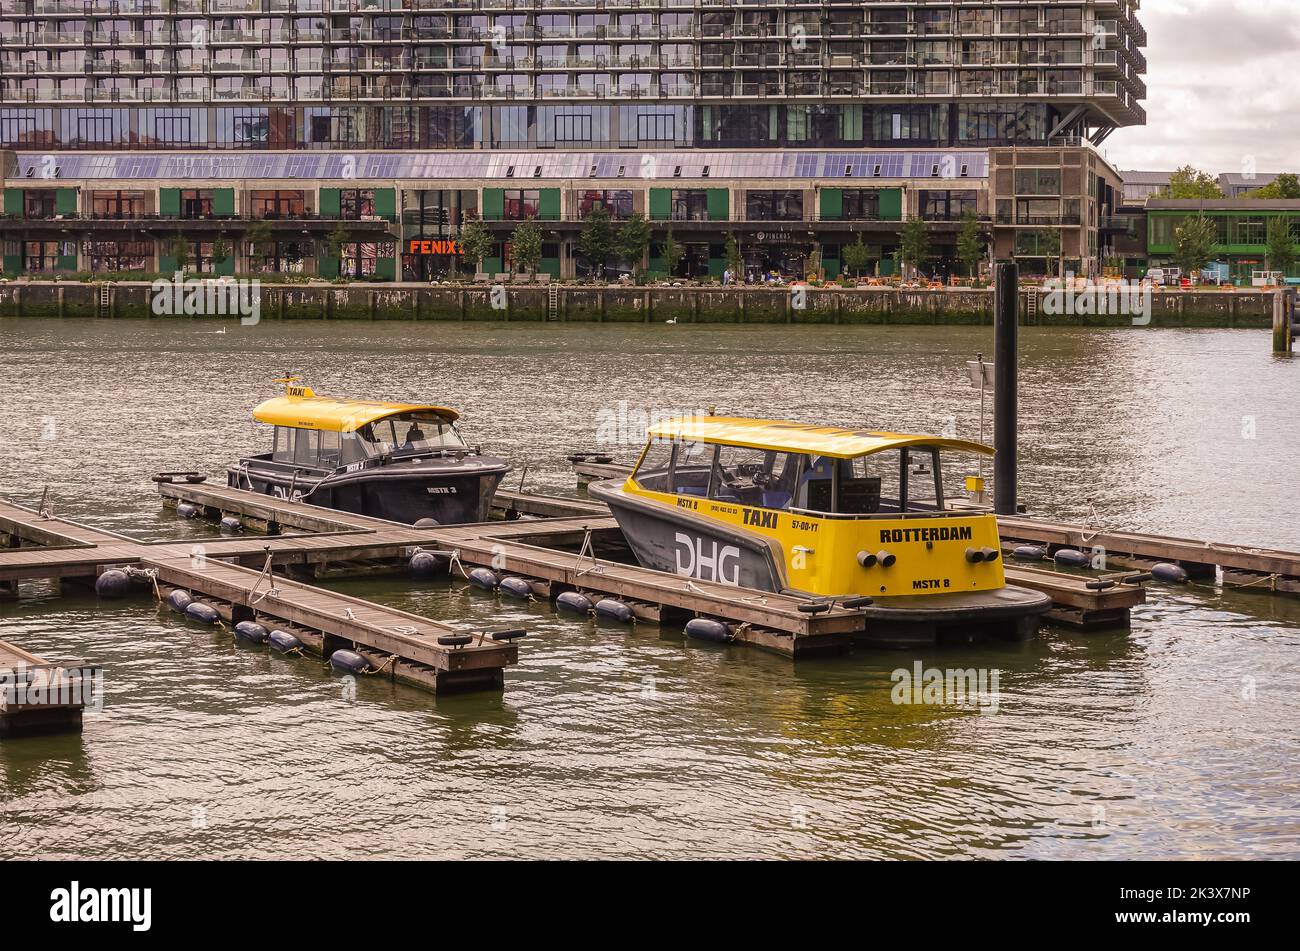 Rotterdam, Netherlands - July 11, 2022: 2 yellow-black DHG water taxi boats docked at Rijnhaven with Nico Koomanskade in back on which Fenix Food Fact Stock Photo